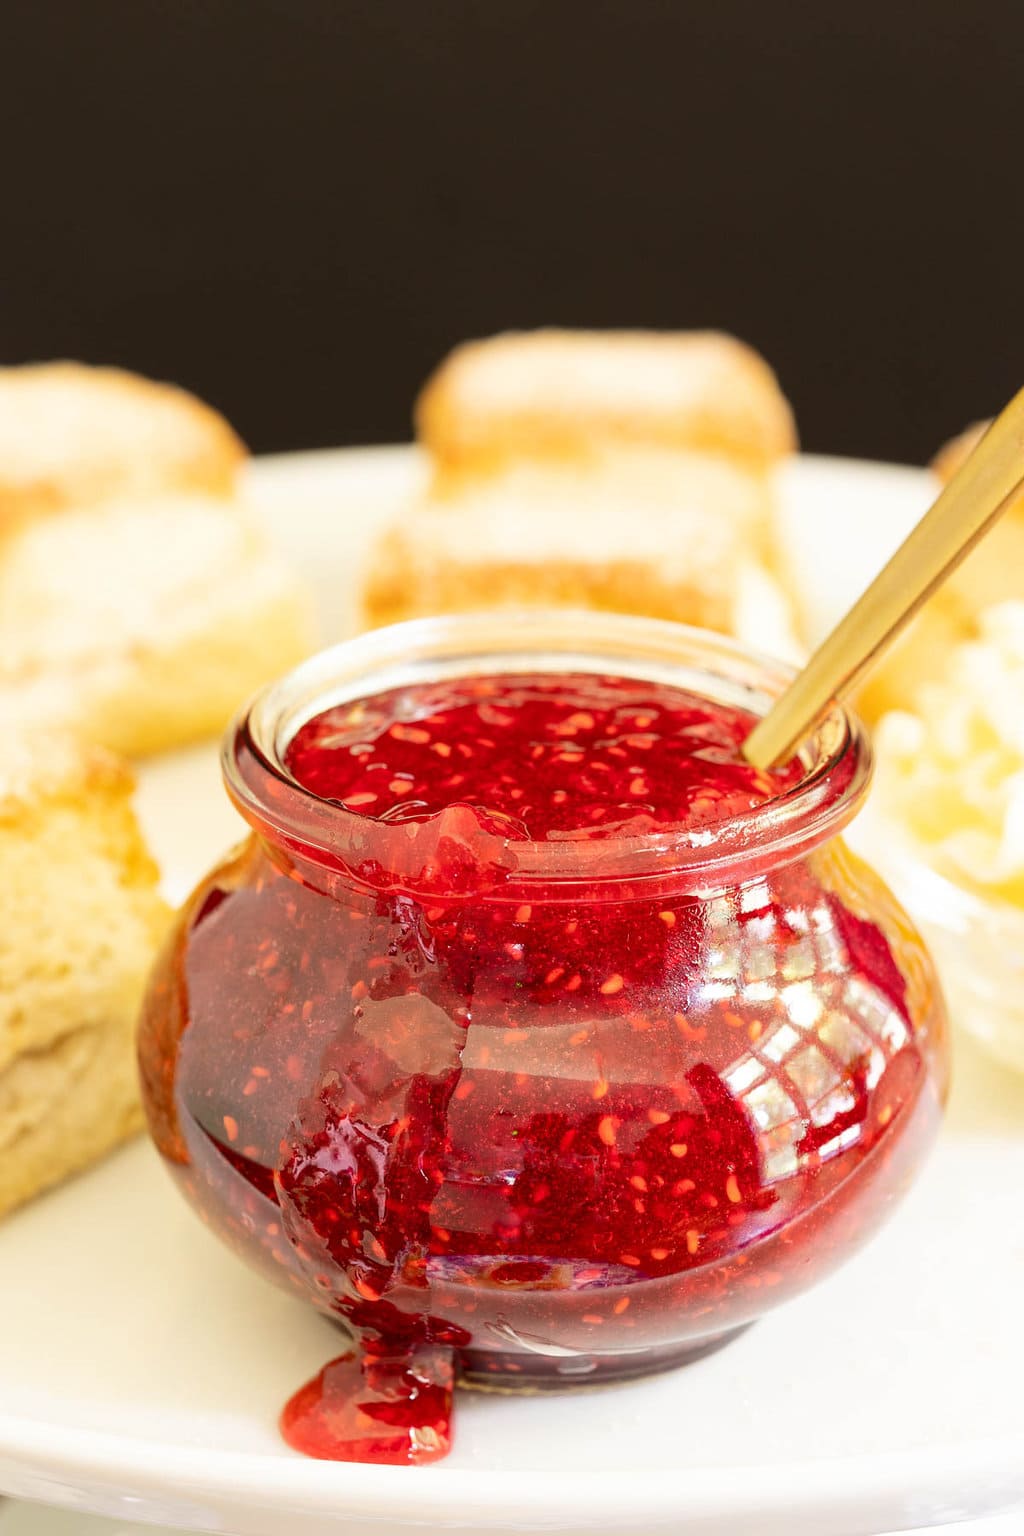 Vertical closeup photo of a Weck jar of Raspberry Freezer Jam surrounded by Ridiculously Easy Biscuits.